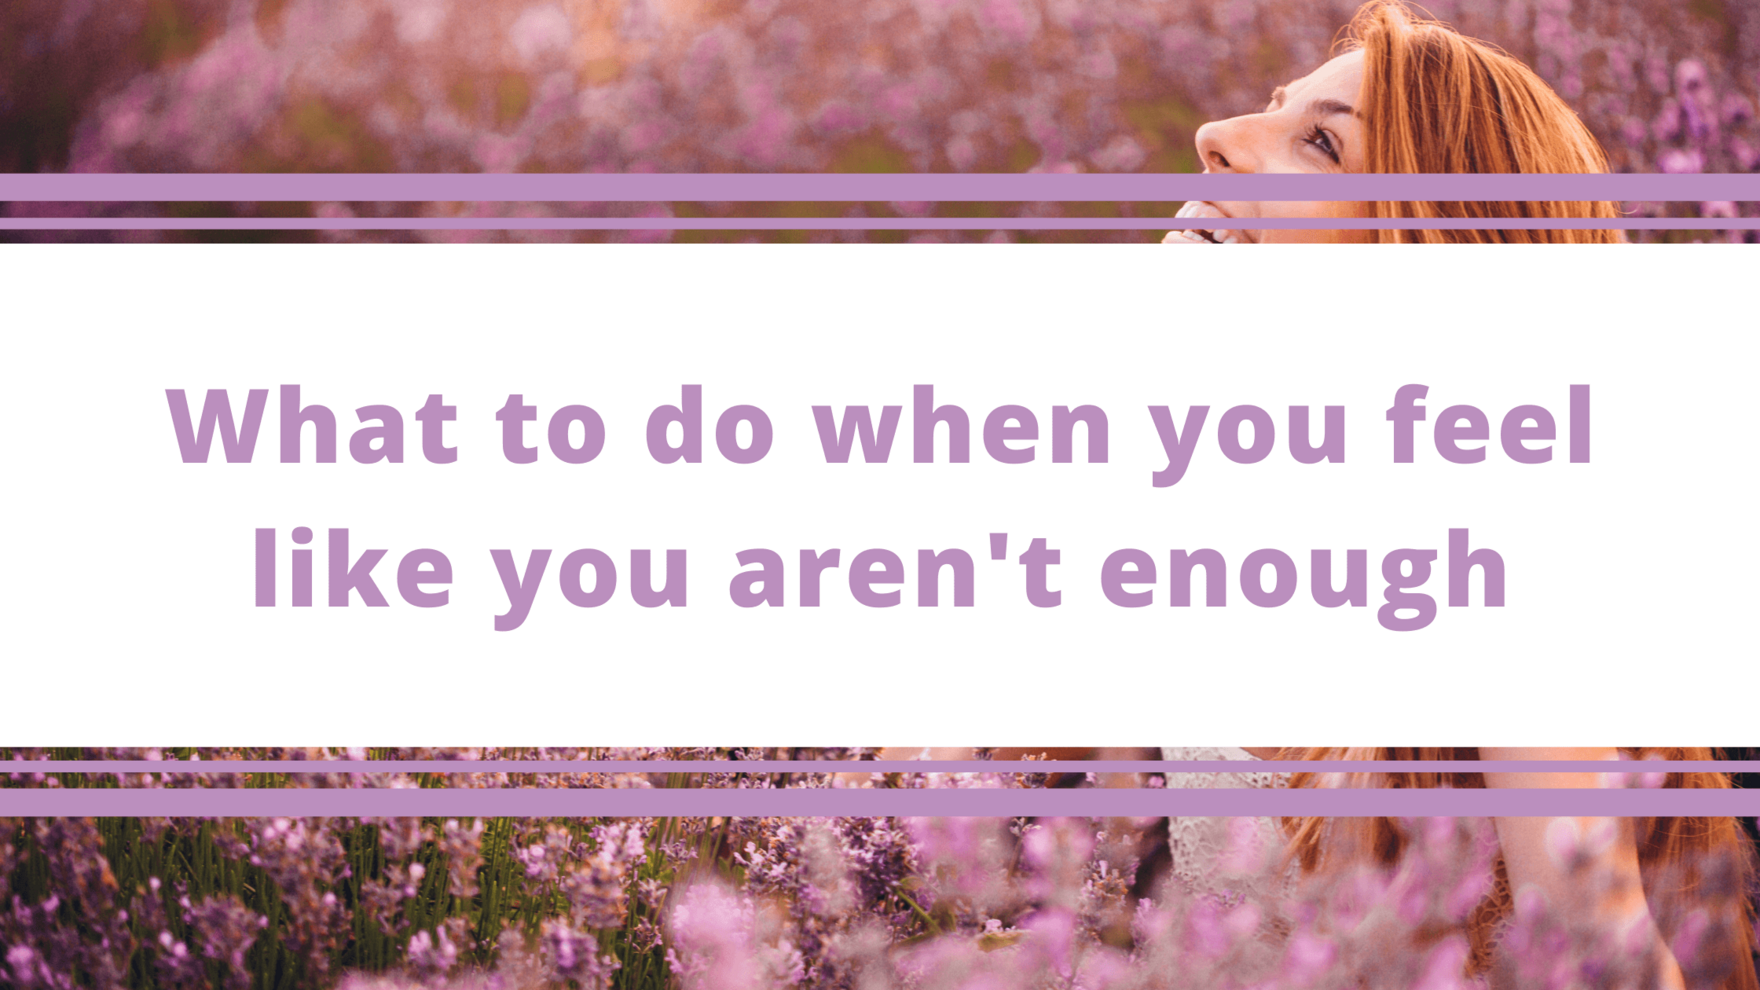 Top Tips Blog - What to do when you feel like you aren't enough